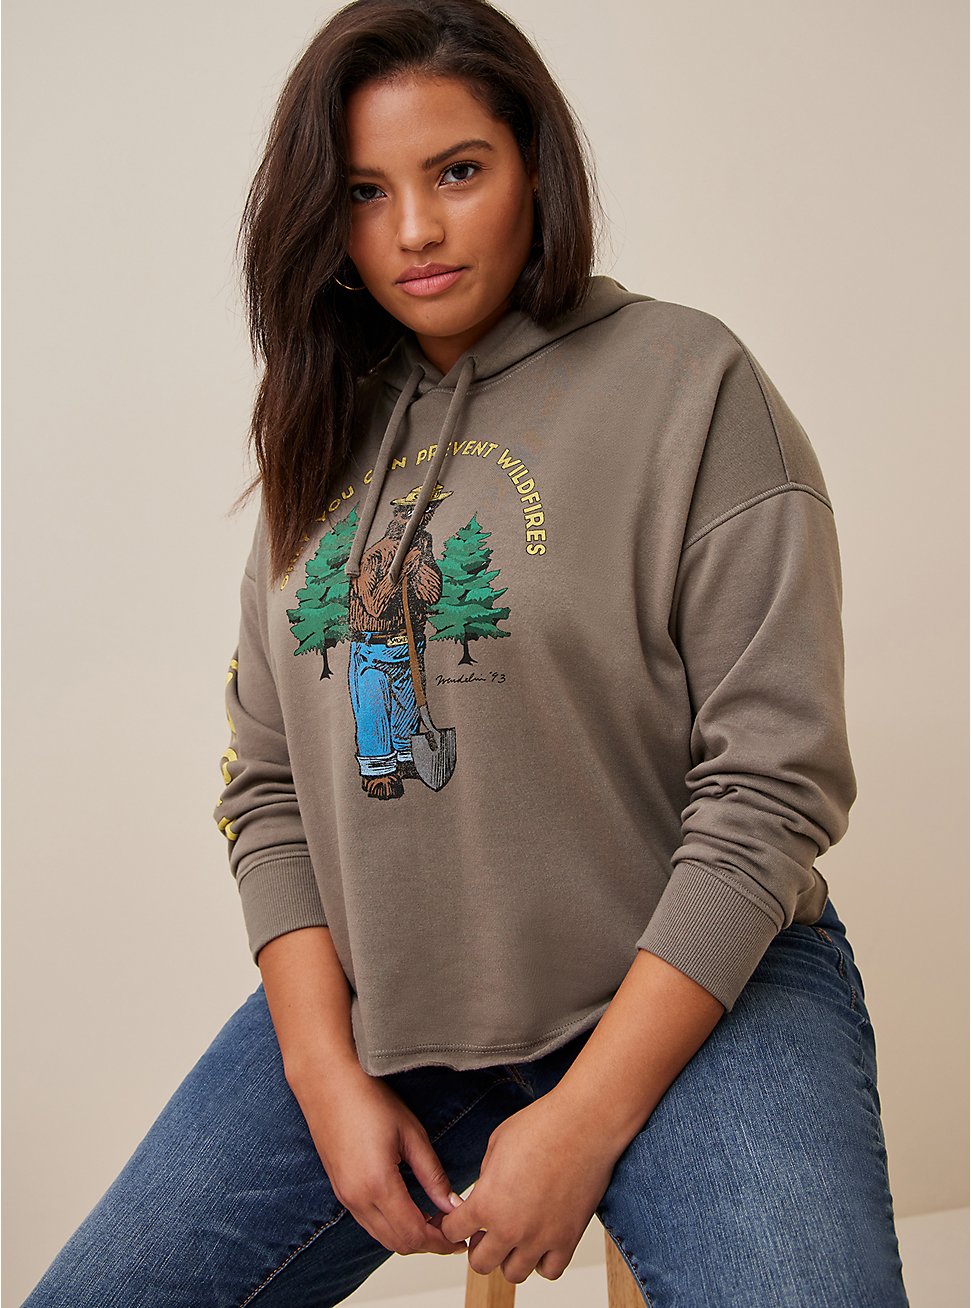 Smokey Bear Relaxed Fit Cozy Fleece Pullover Crop Hoodie, DUSTY OLIVE, hi-res